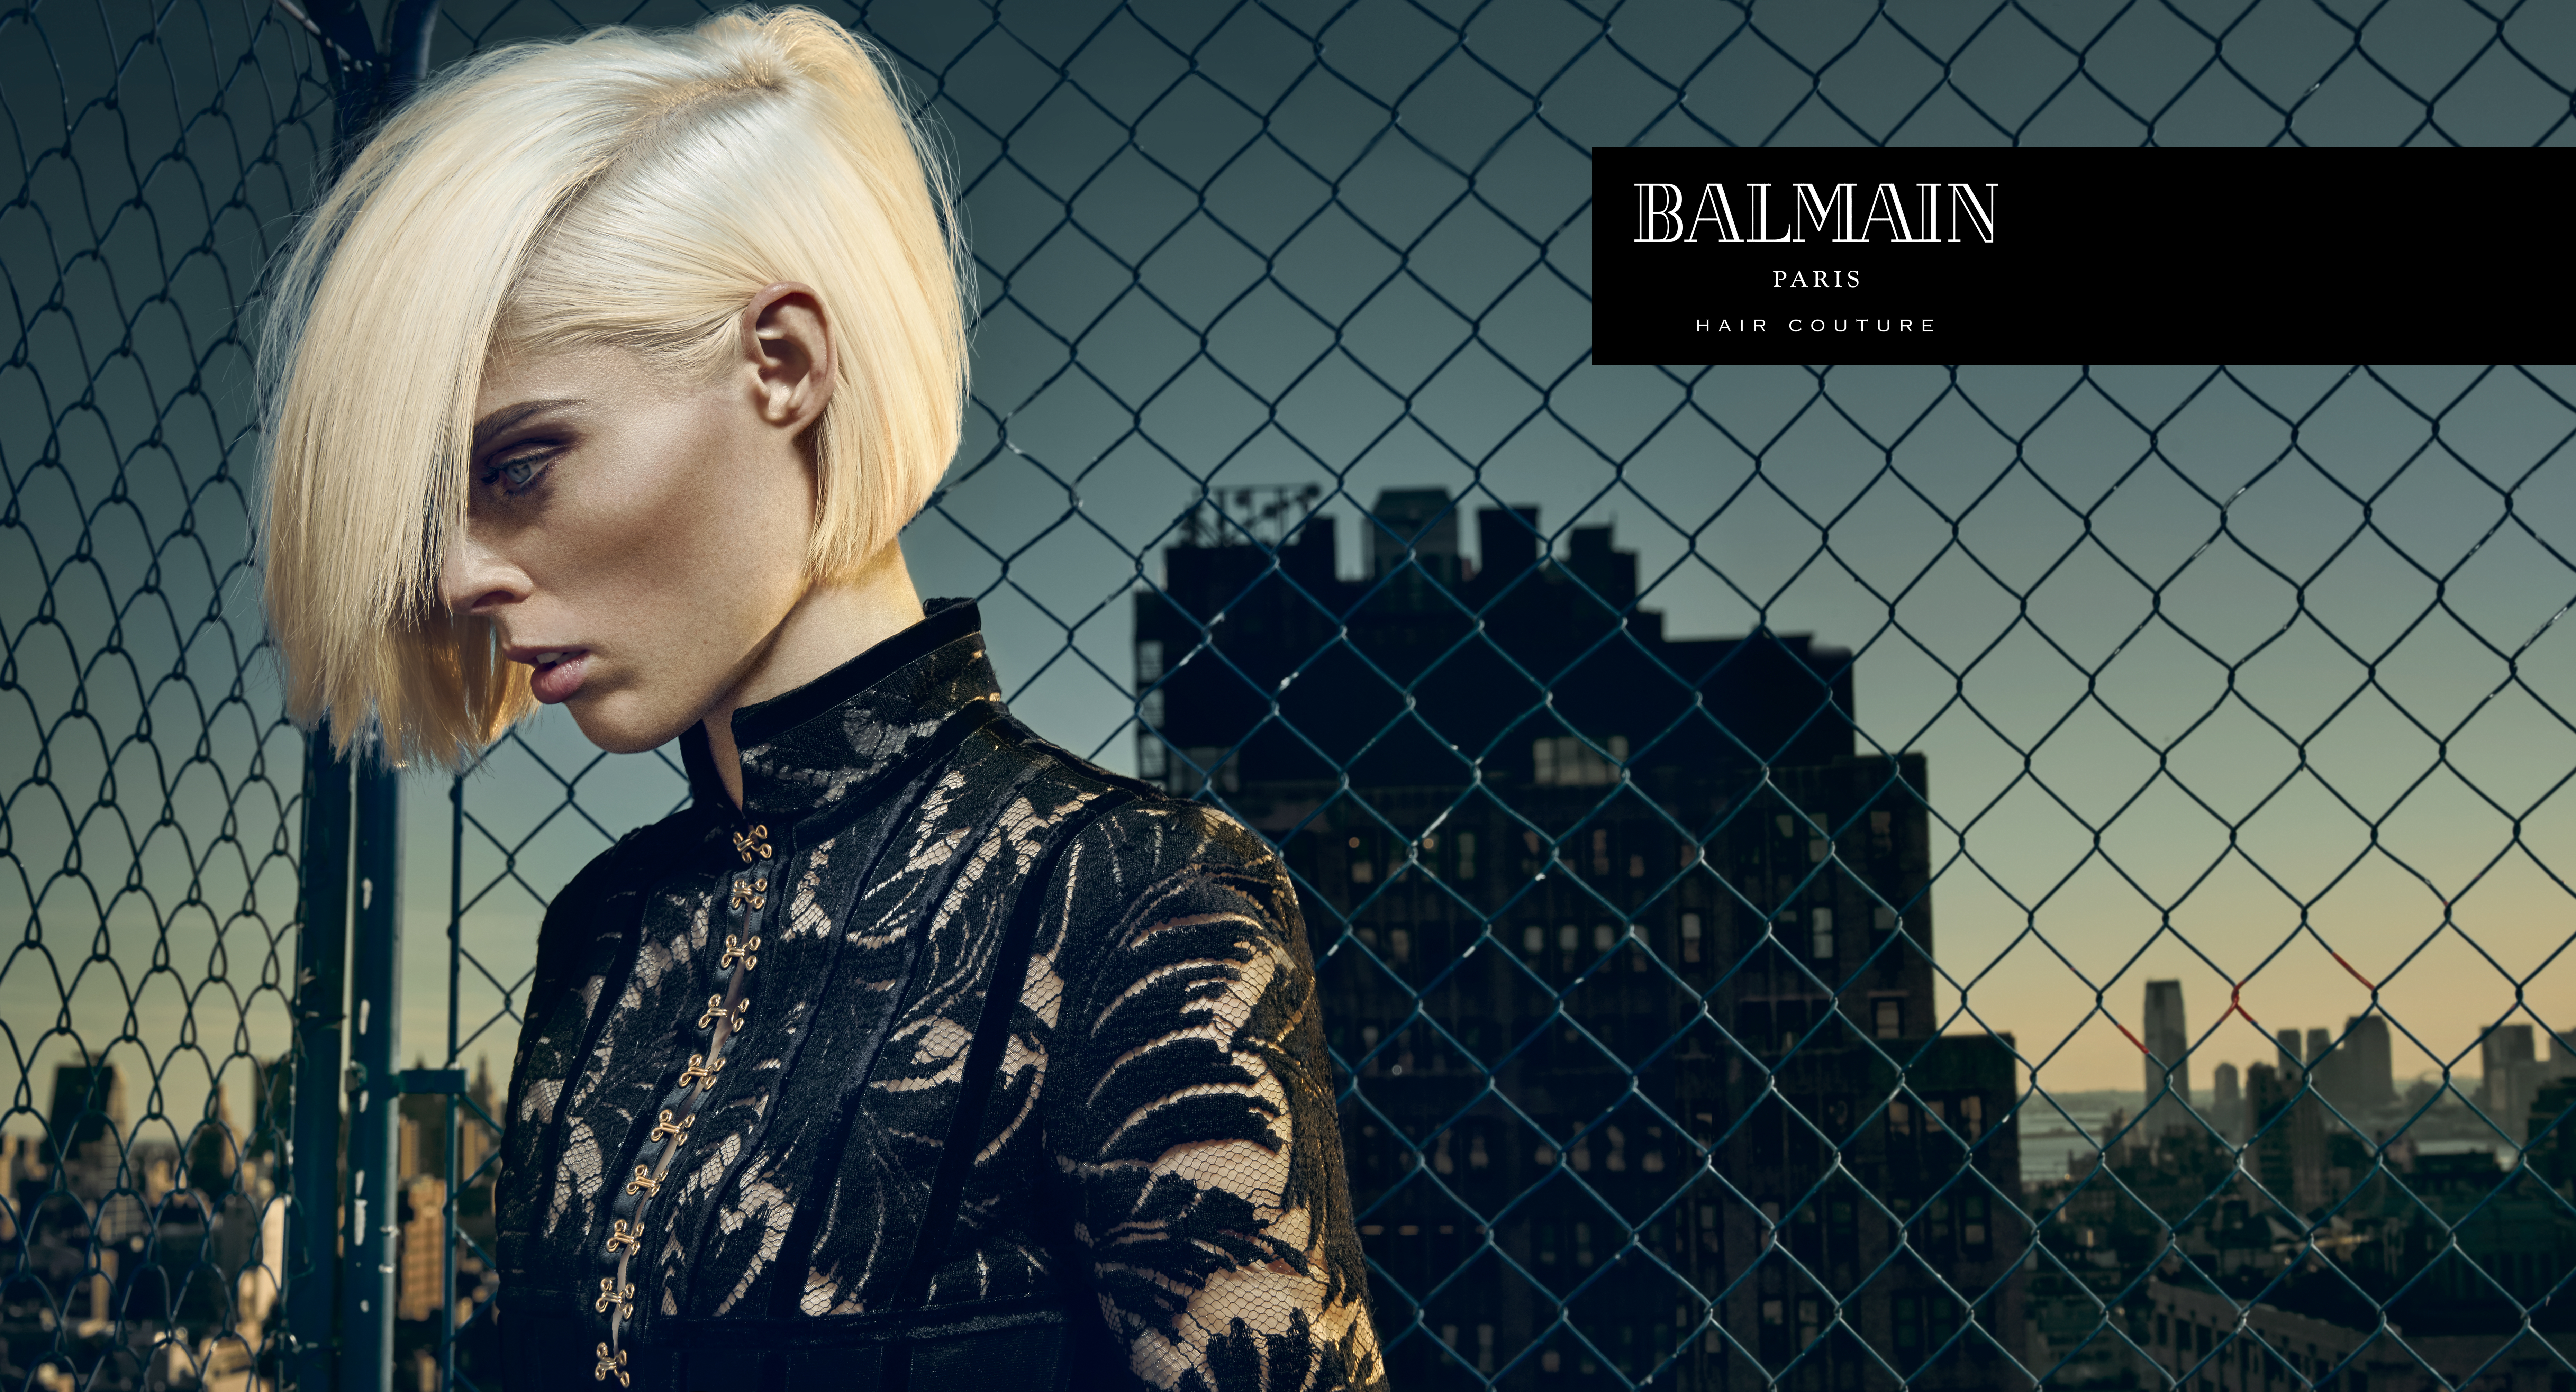 Coco Rocha Gets a Makeover for Balmain Hair Couture - Daily Front Row